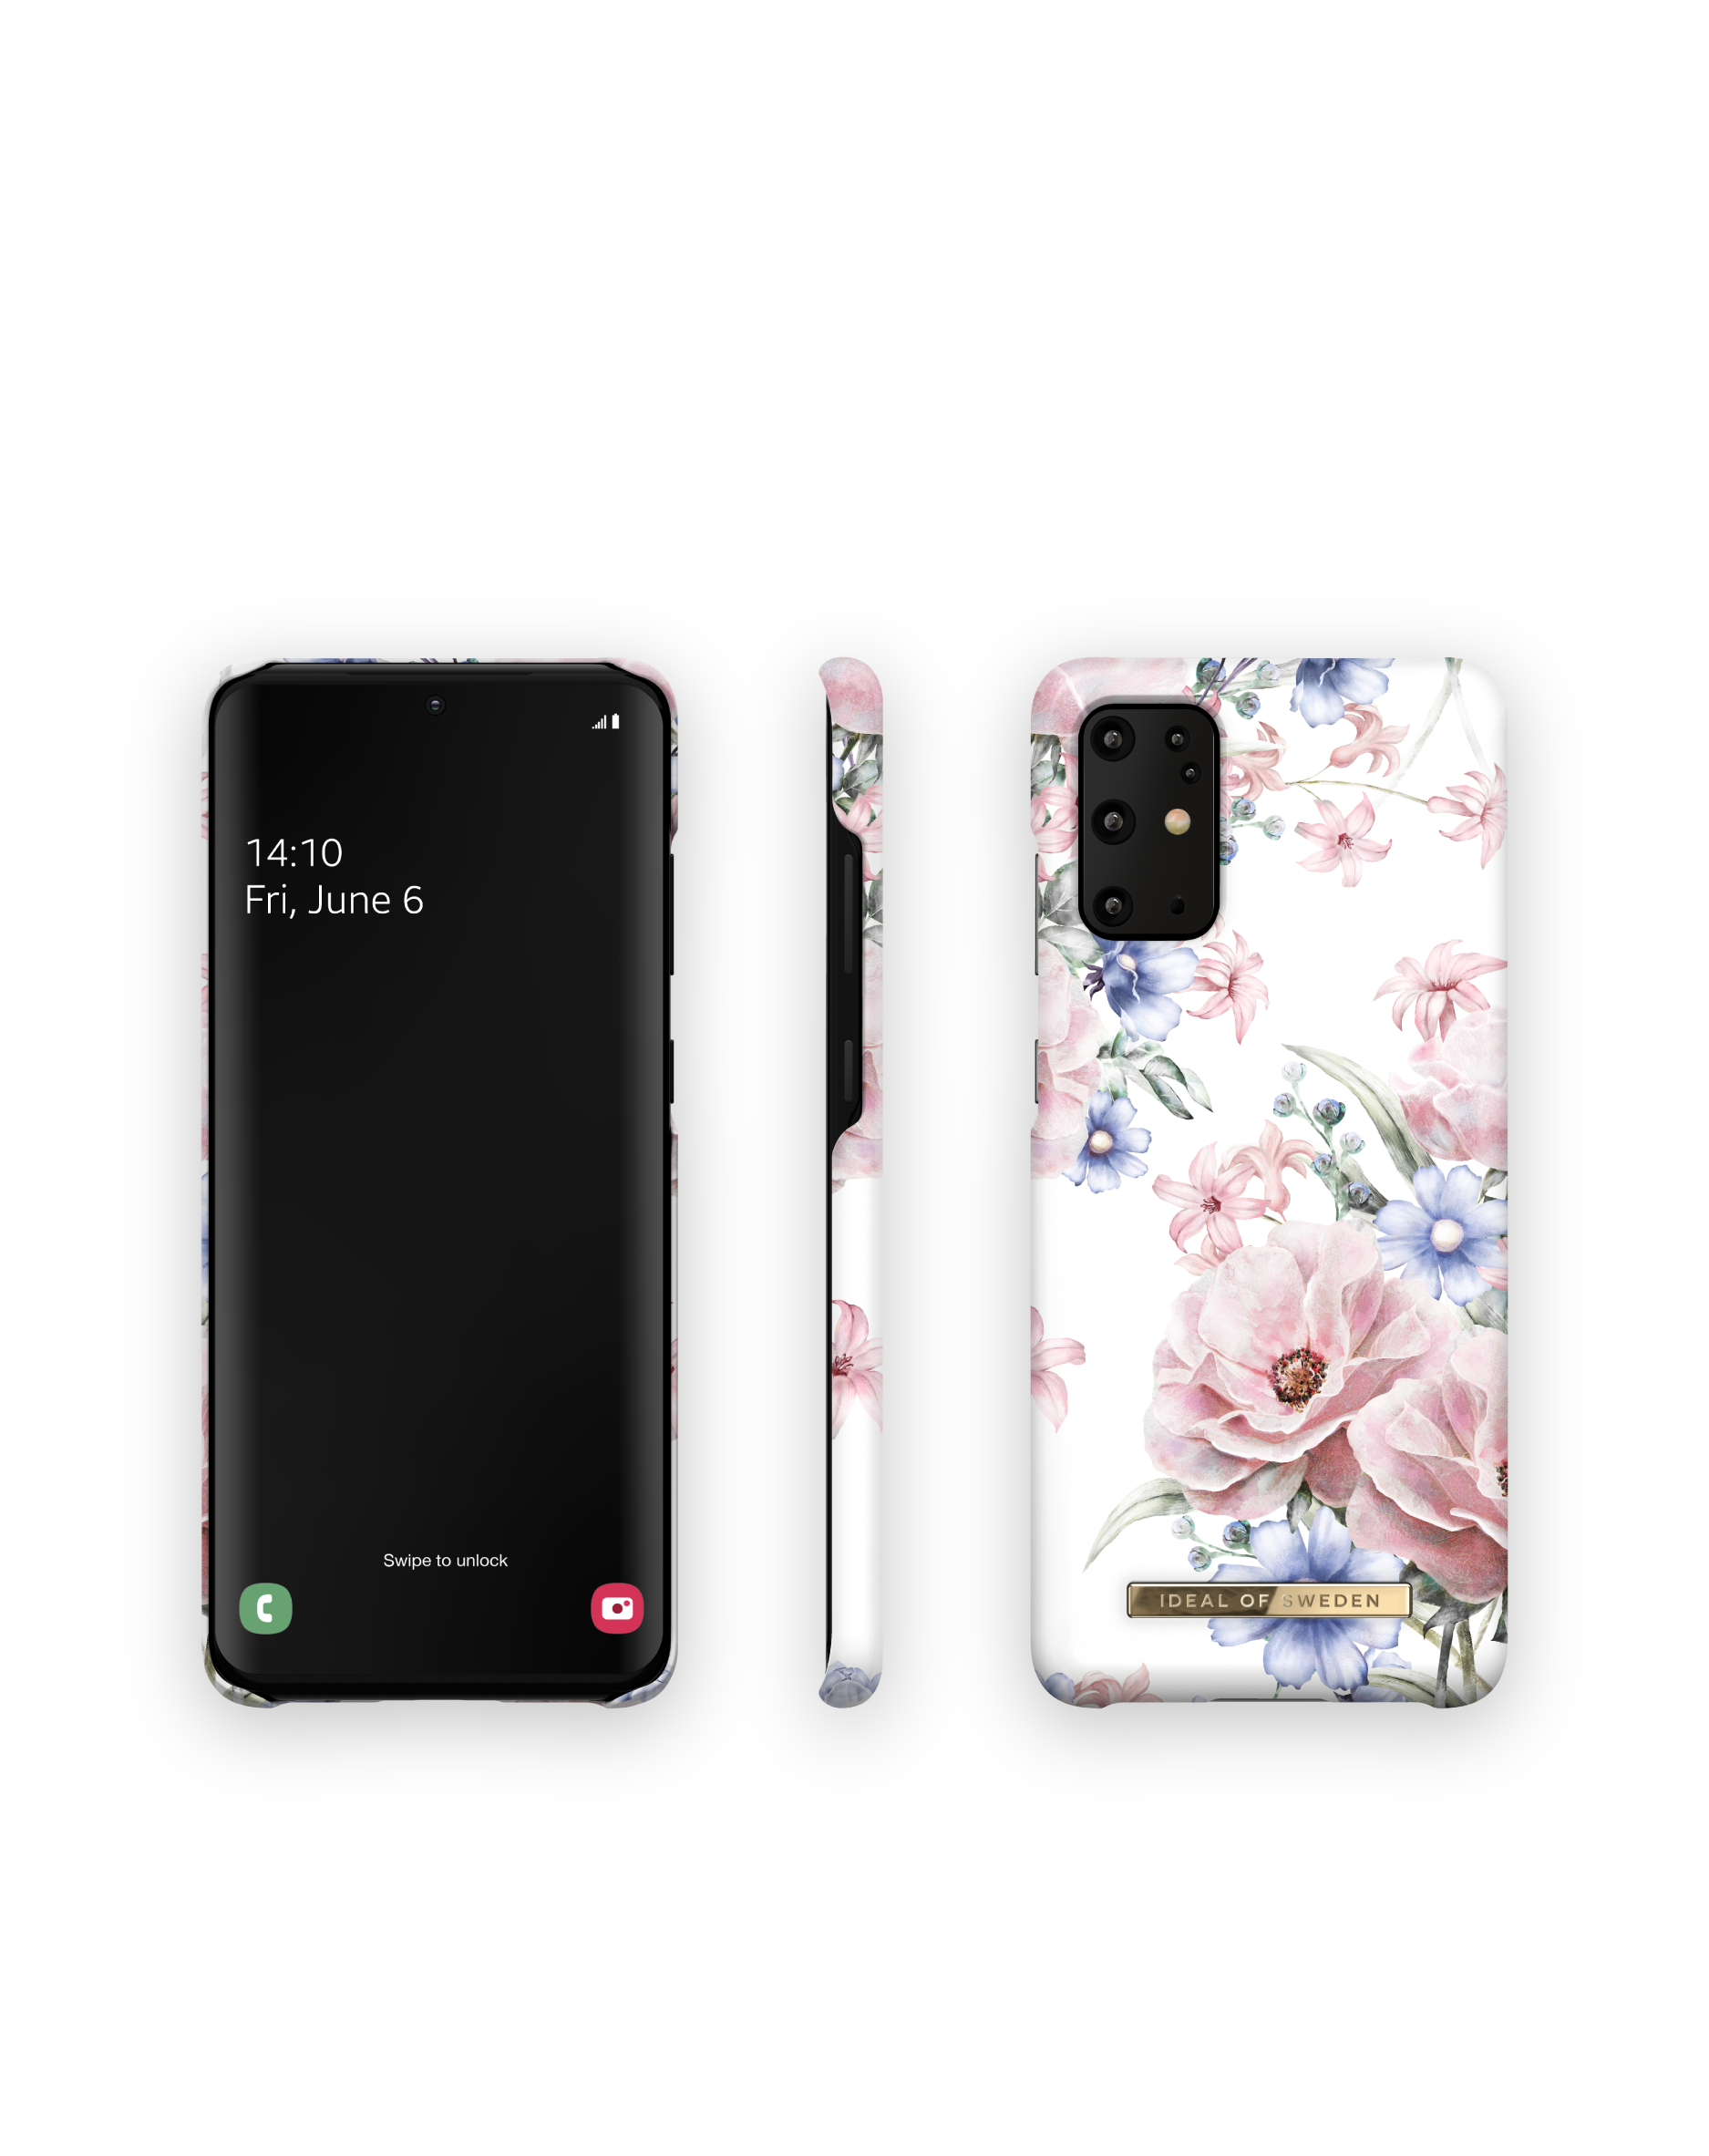 IDEAL OF SWEDEN IDFCS17-S11-58, Floral Samsung, S20+, Romance Galaxy Backcover